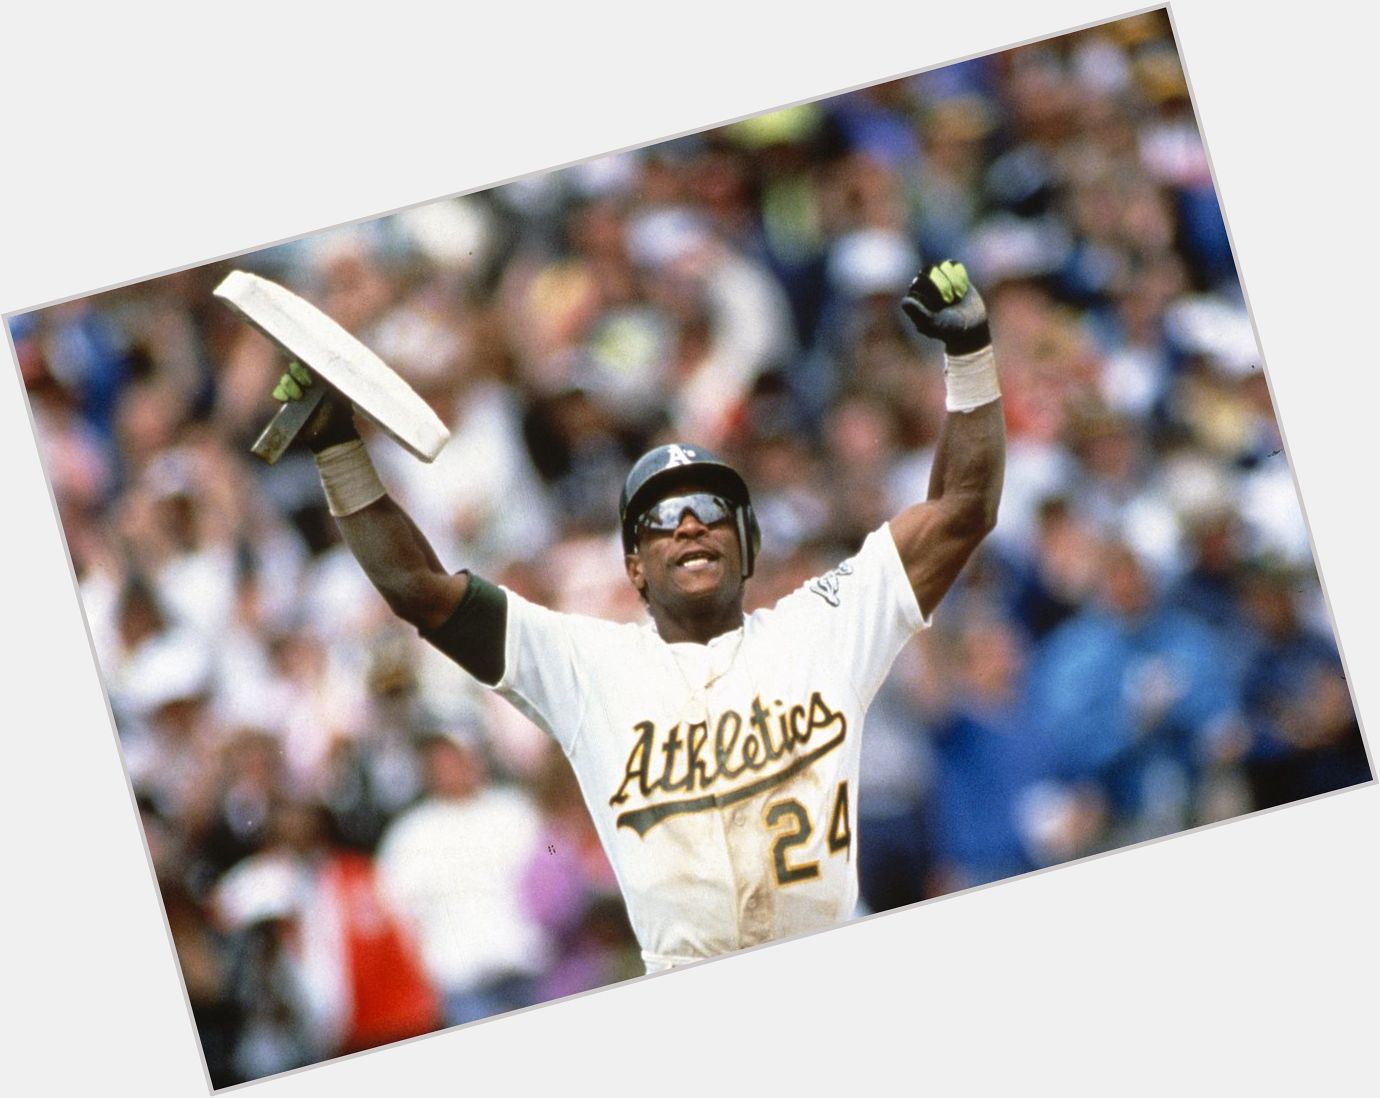 Happy Birthday to legend and Hall of Fame outfielder Rickey Henderson!  